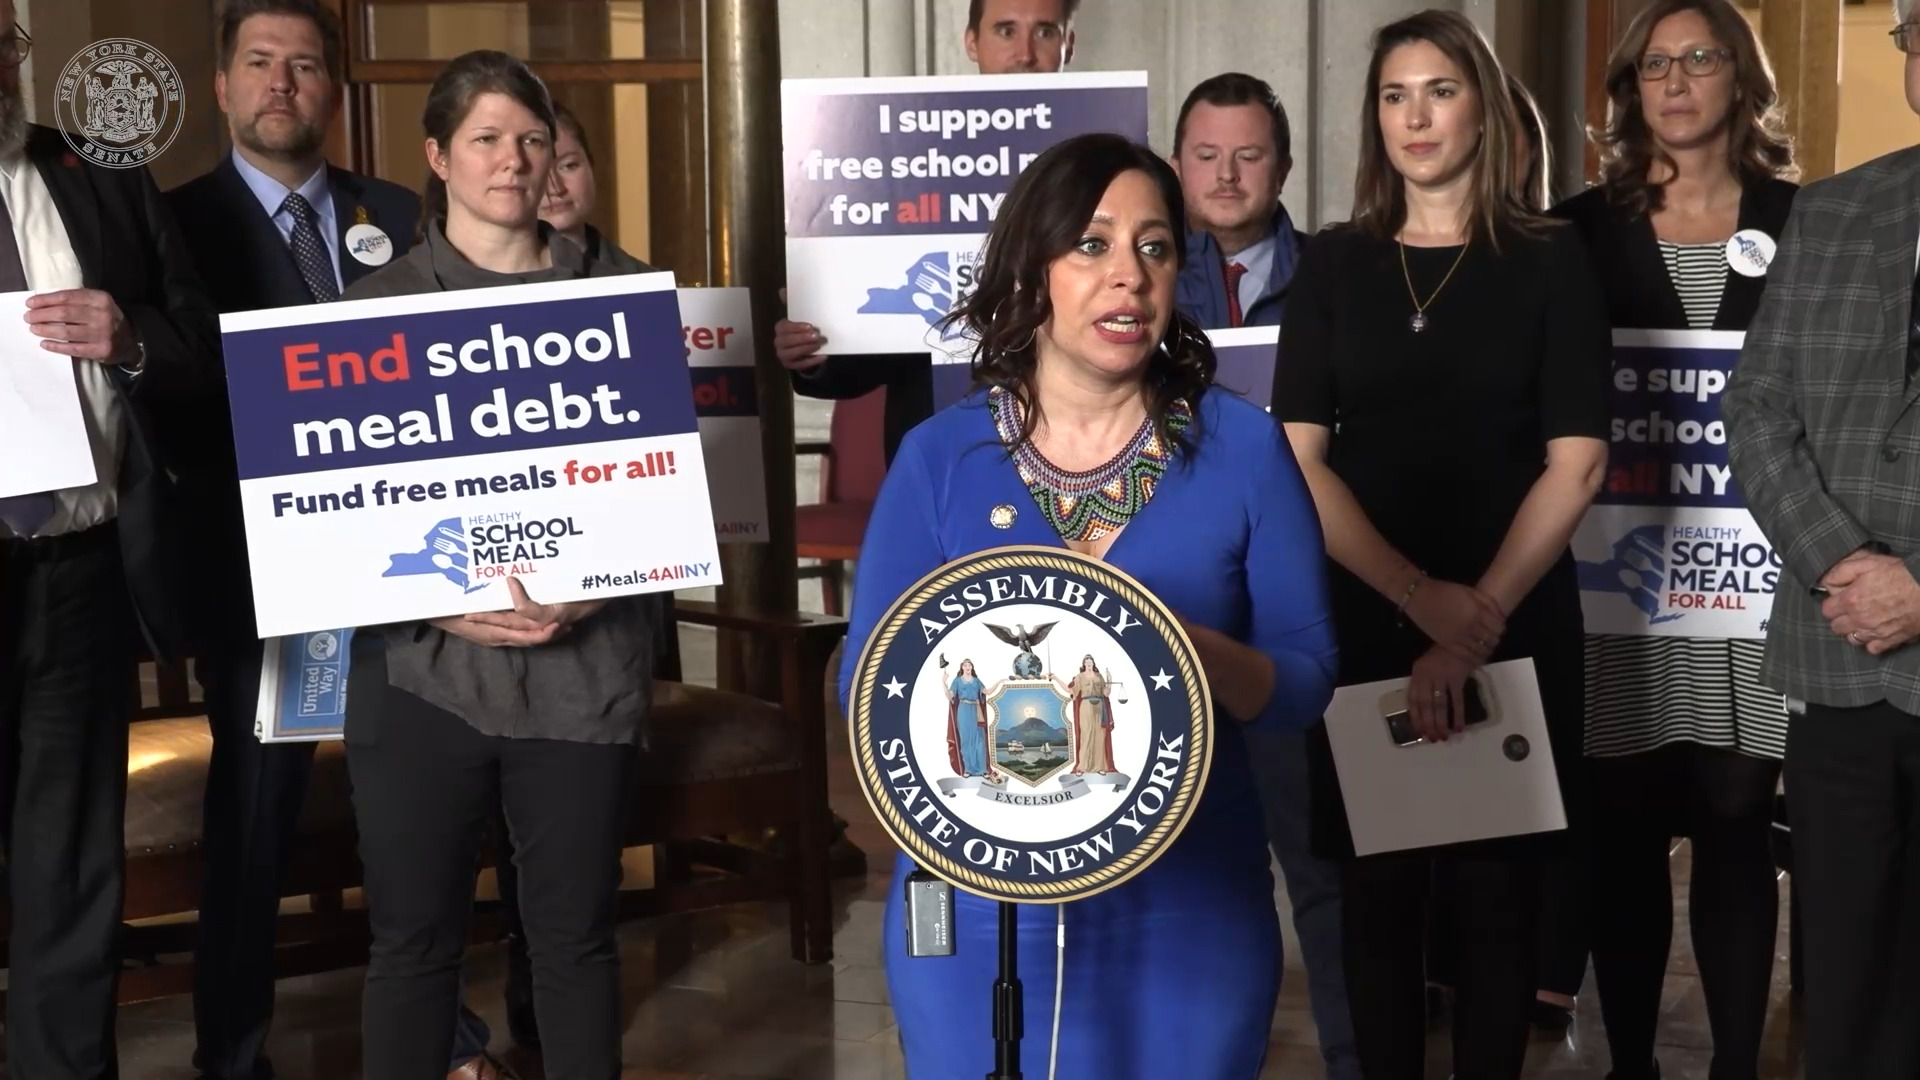 Gonzalez-Rojas Calls for Free School Lunches in New York